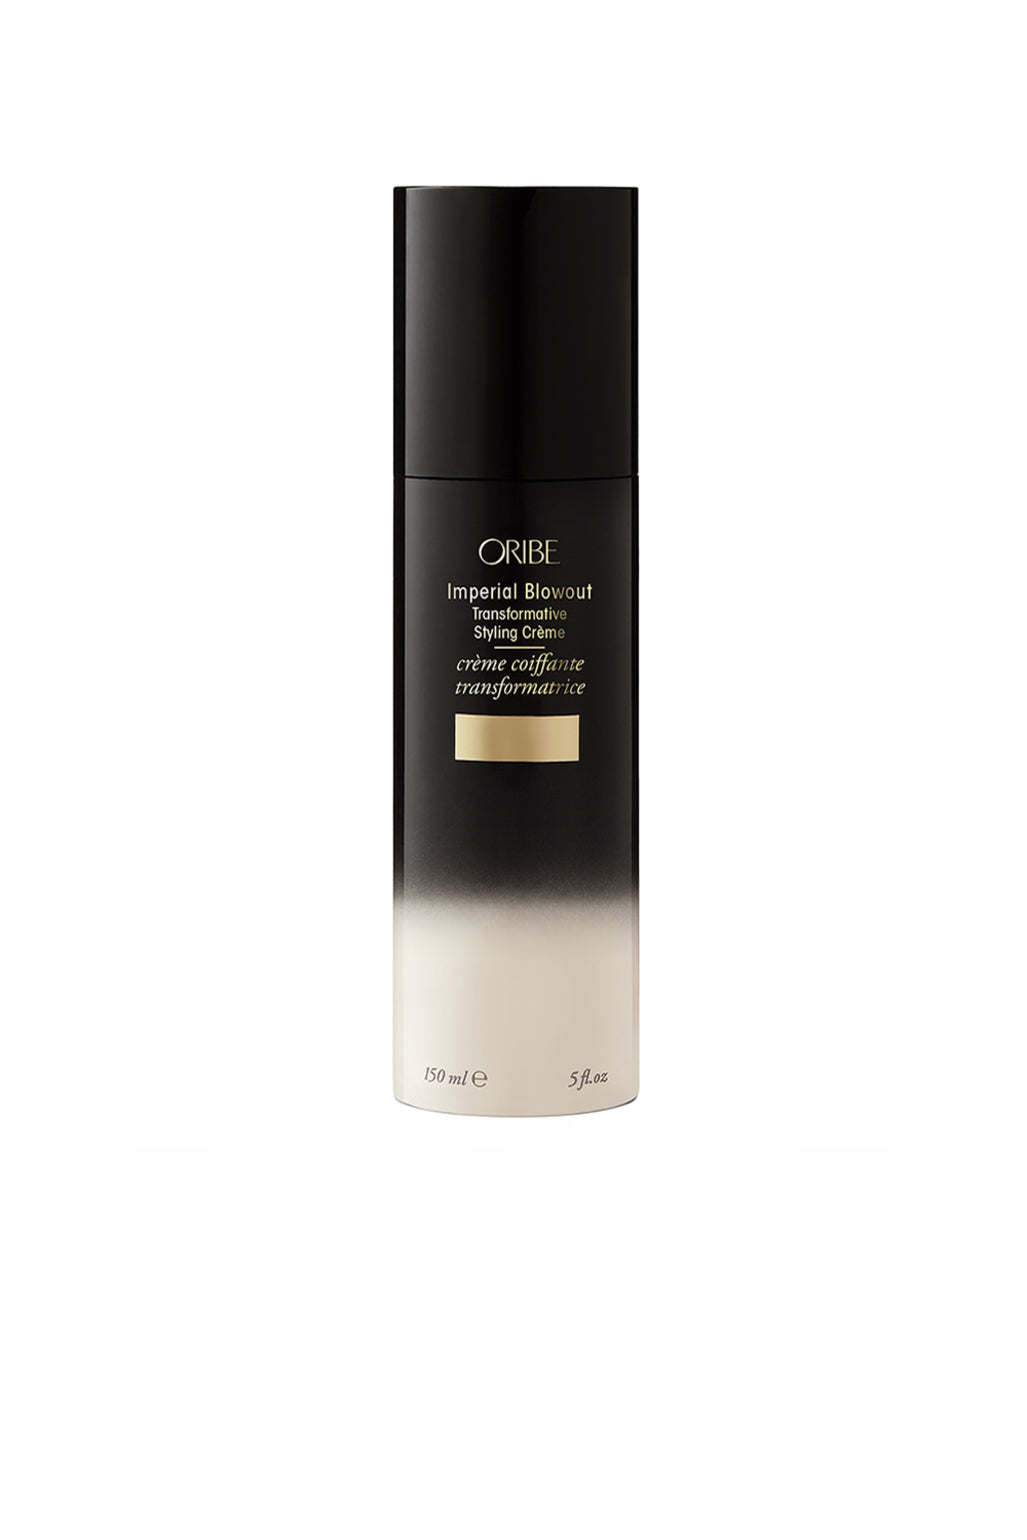 Oribe Gold Lust Imperial Blowout Transformative Styling Crème